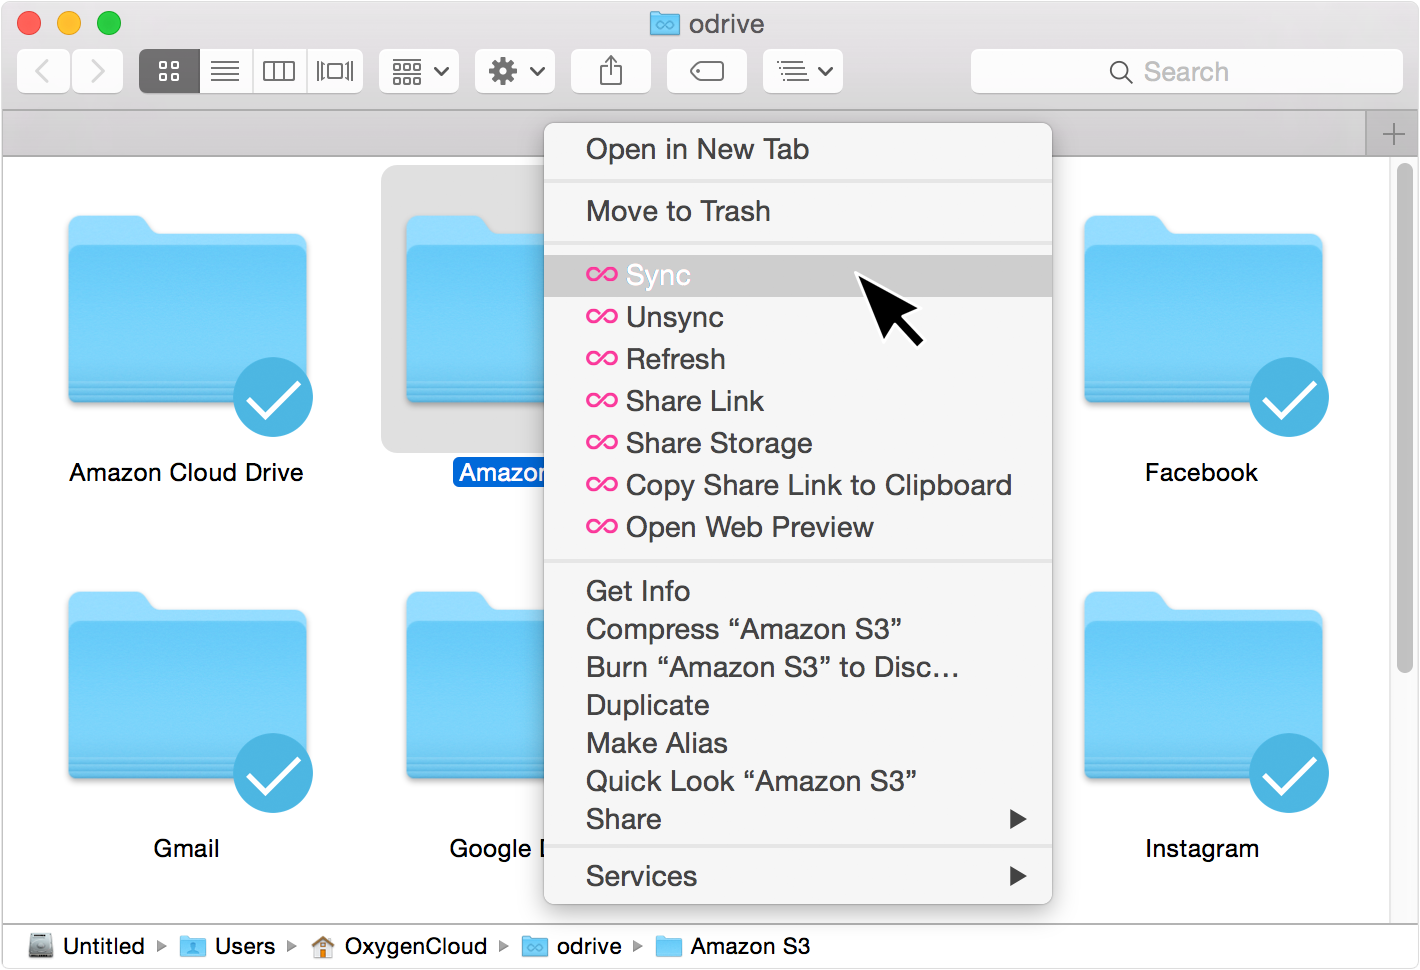 Right-click any folder in your finder to reveal odrive options